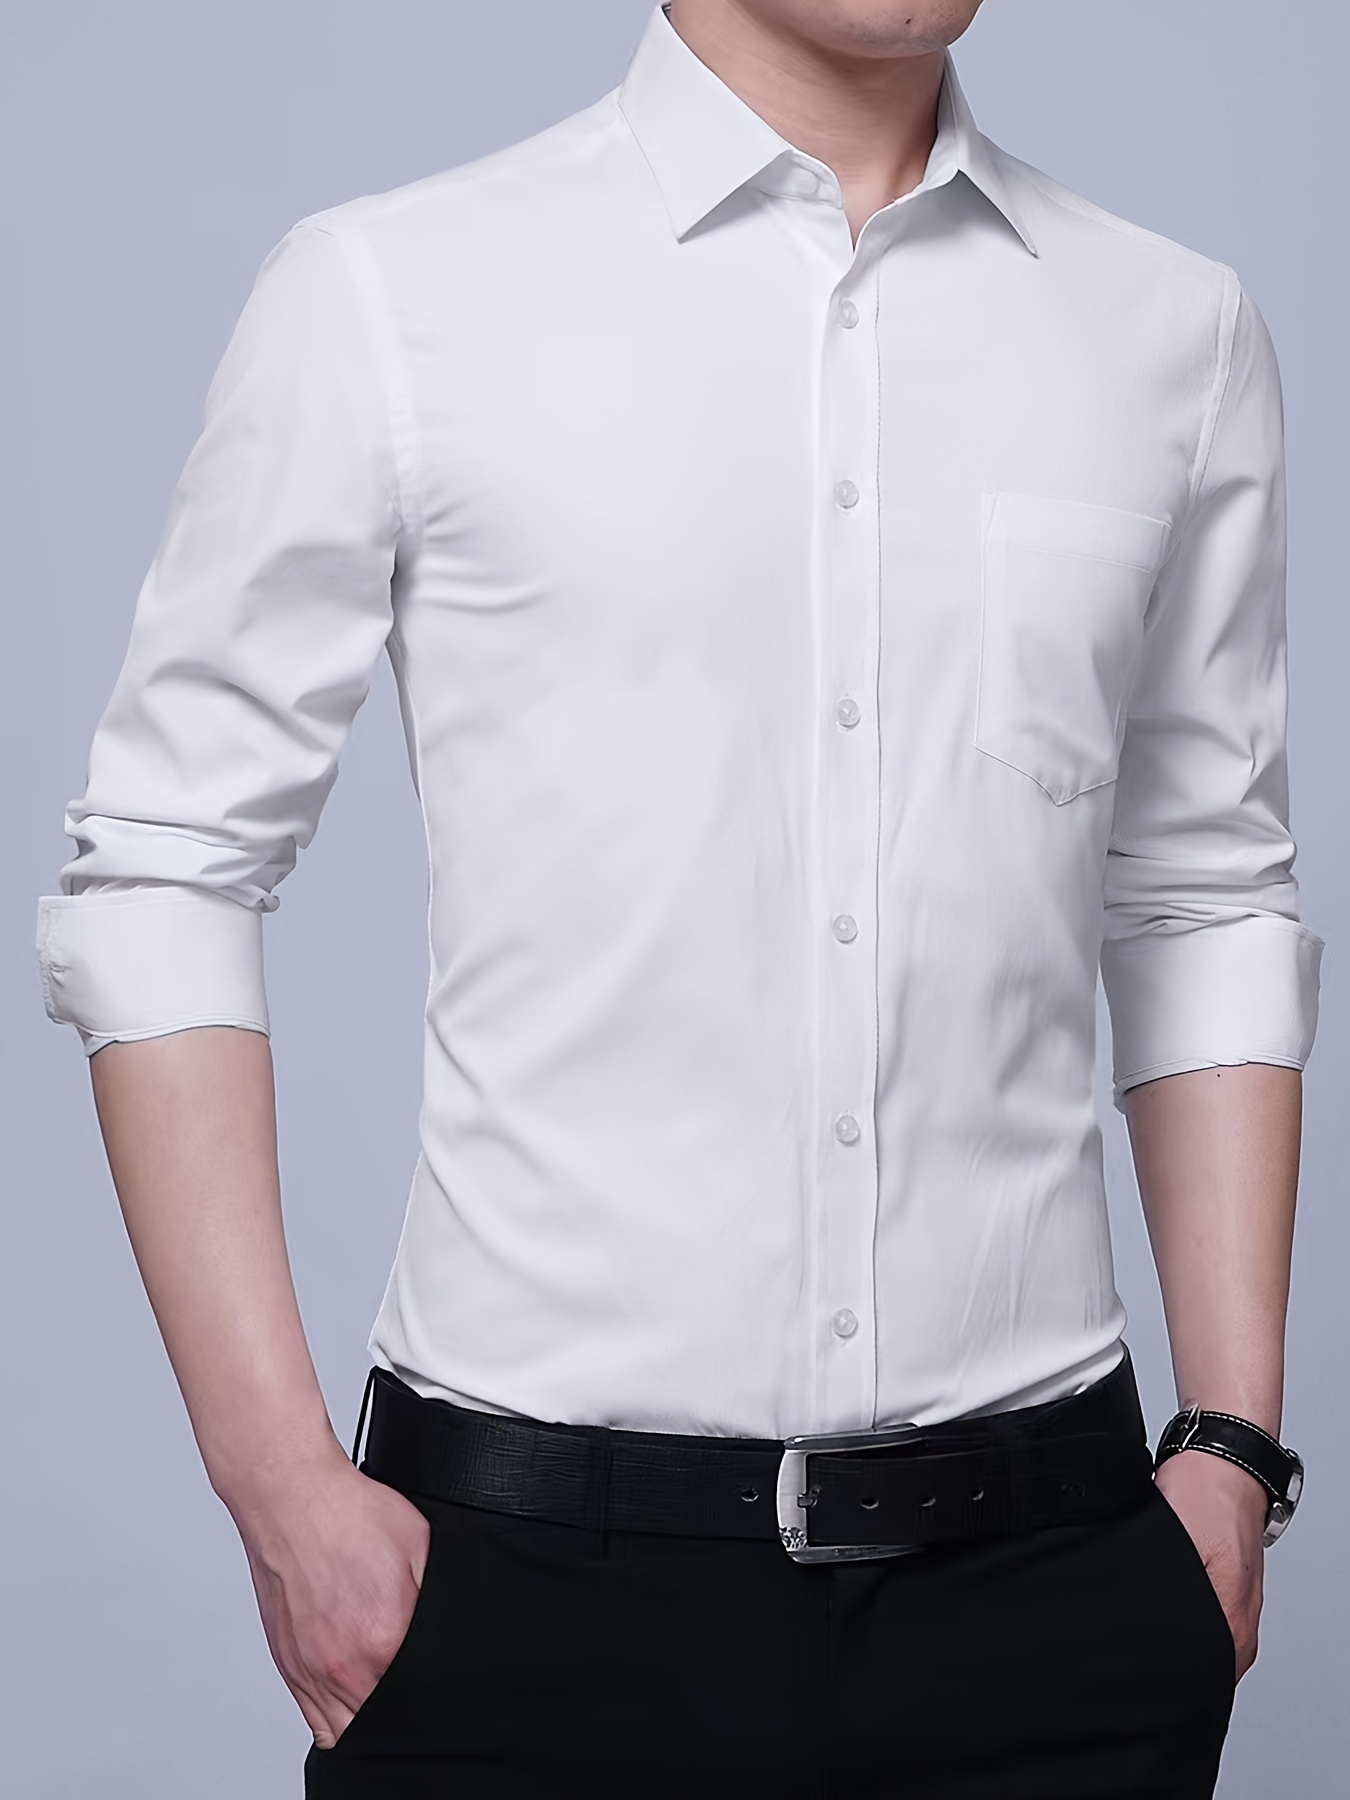 Men Solid Button-up Dress Shirt Long Sleeve Slim Fit Casual Business Office  Shirts Tops